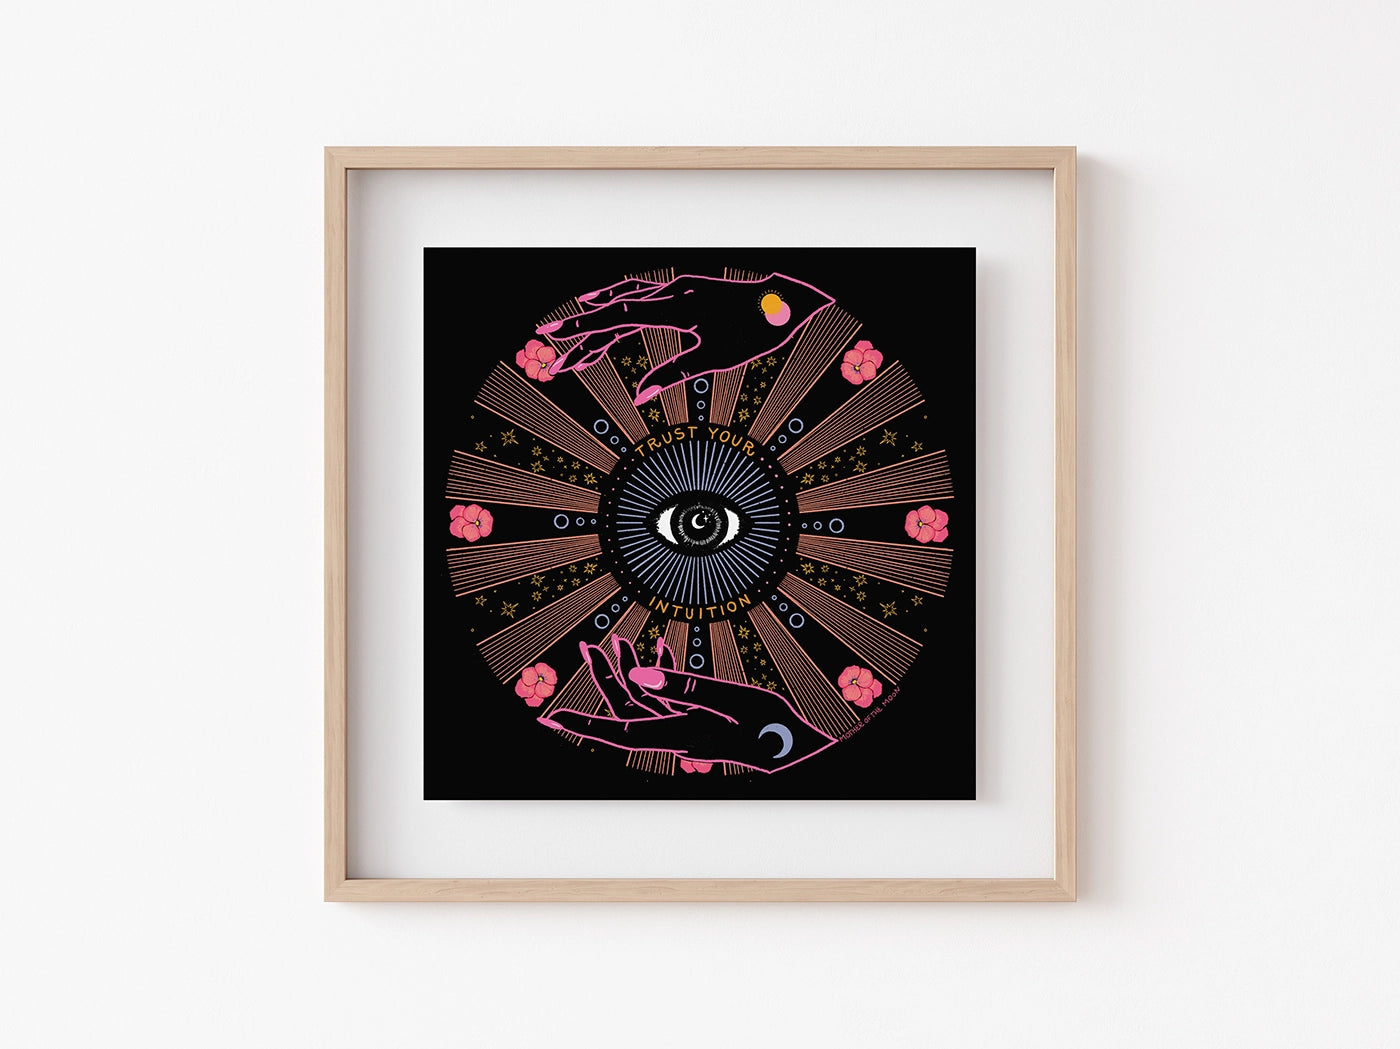 Trust Your Intuition 6x6 Art Print - Moon Room Shop and Wellness